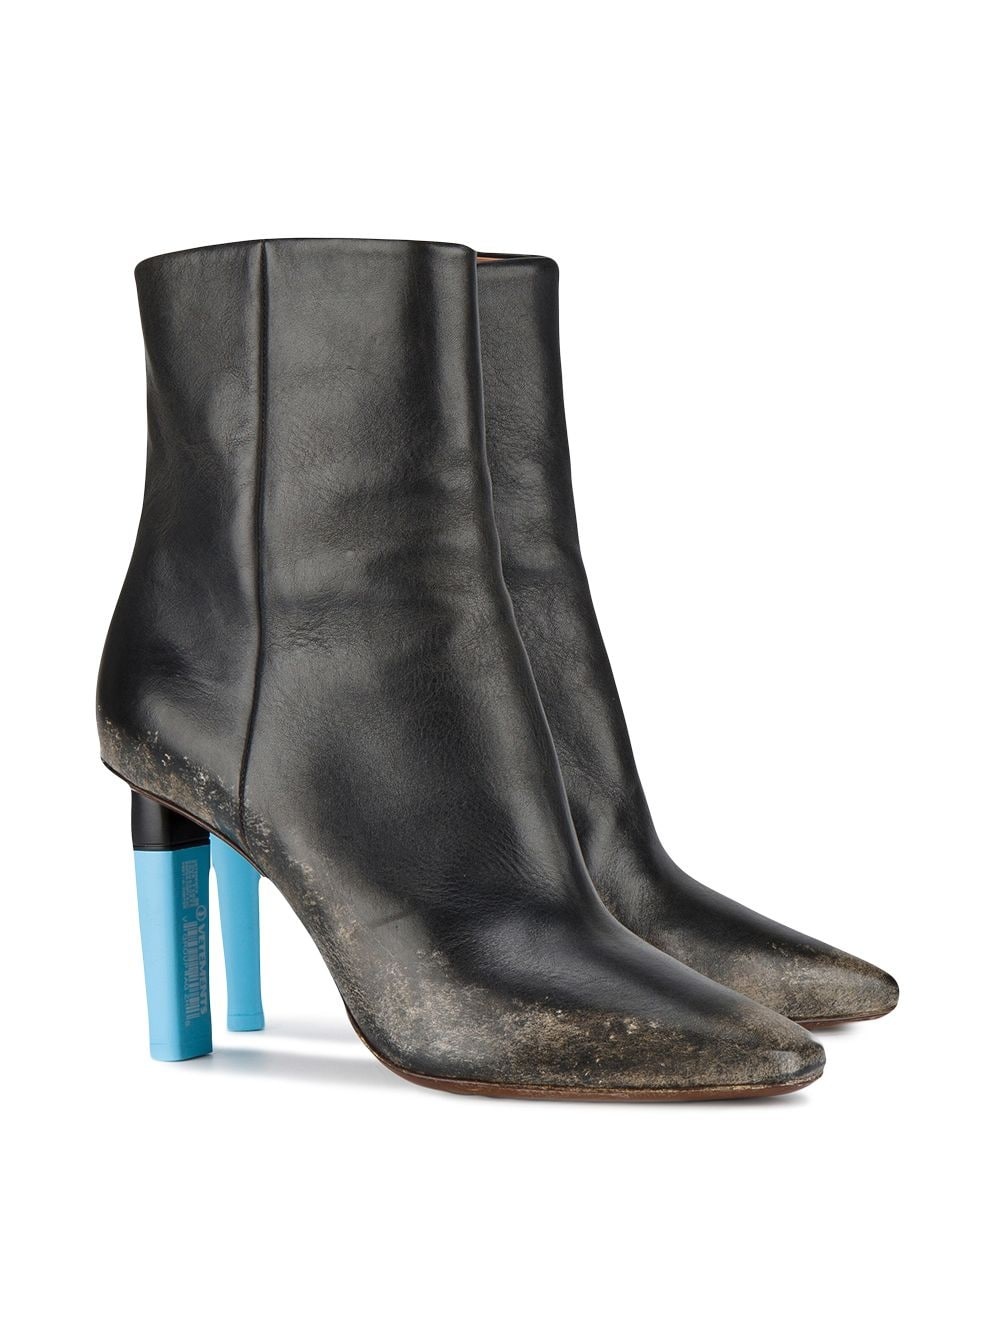 Gypsy Ankle Boot with Blue Highlighter Heel - 3